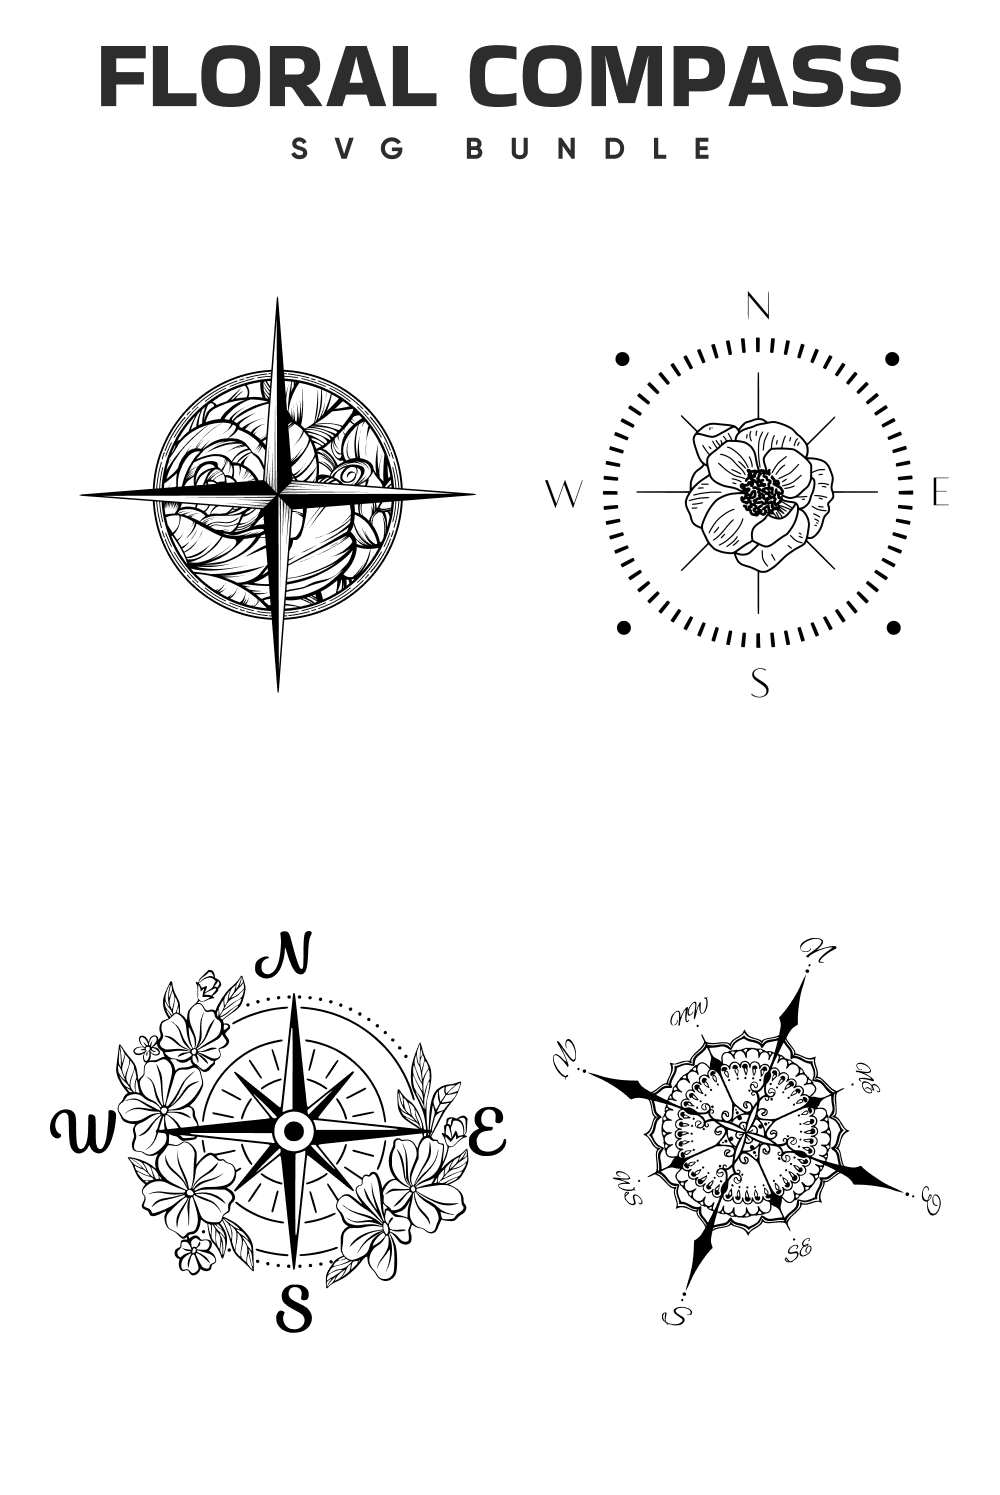 Some options of floral compasses.